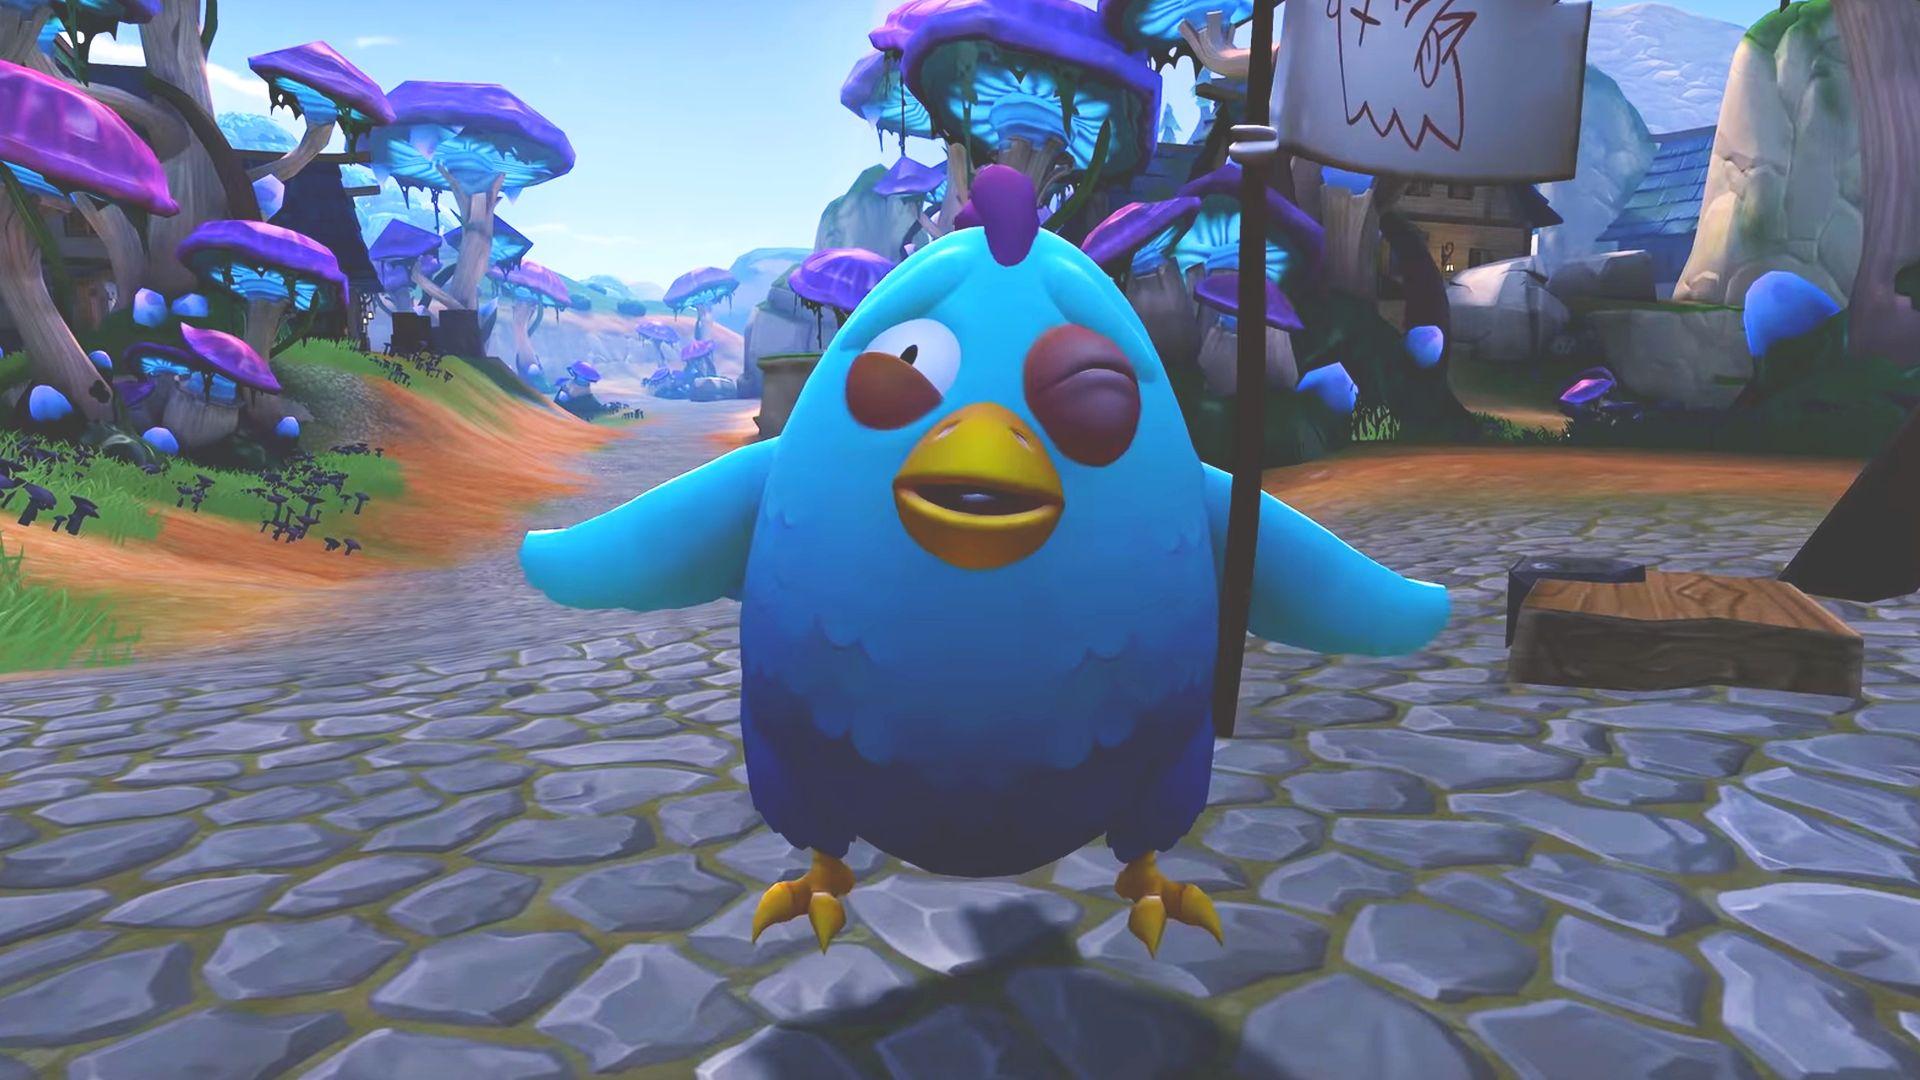 Realm Royale's quick success has been its biggest enemy